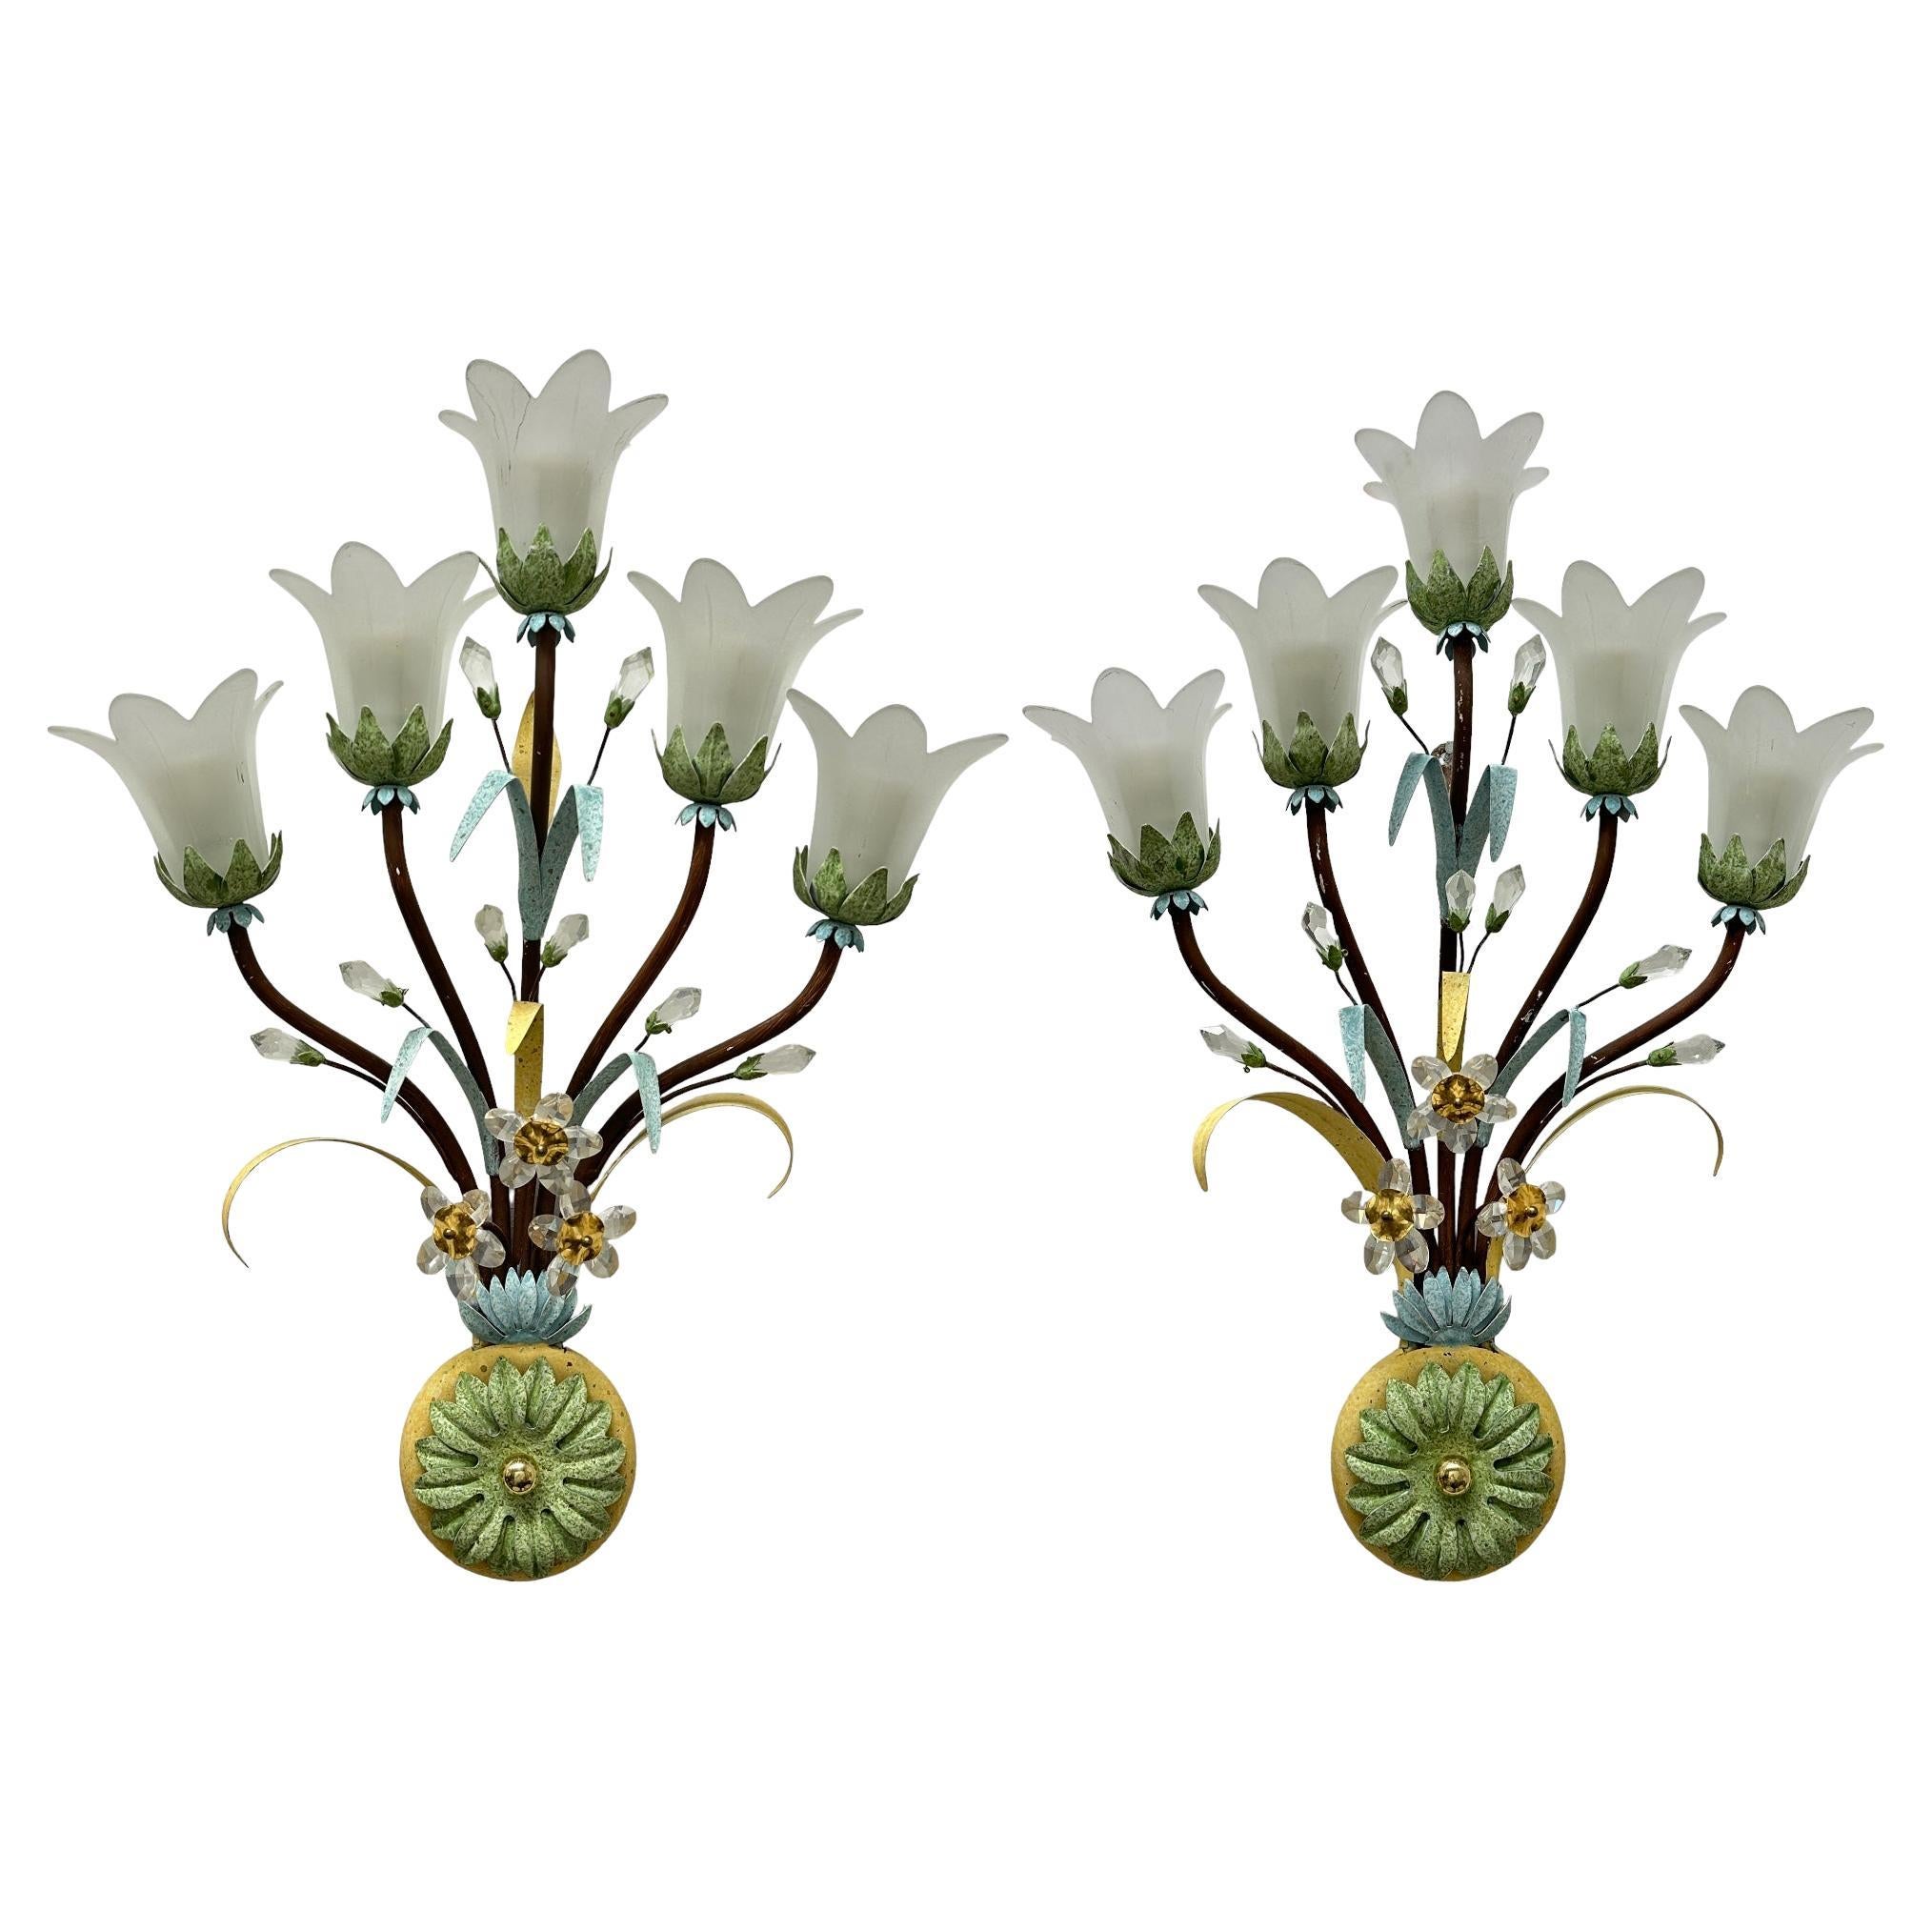 Monumental Pair Florentine Italian Crystal Flower Wall Sconces by Banci, Italy For Sale